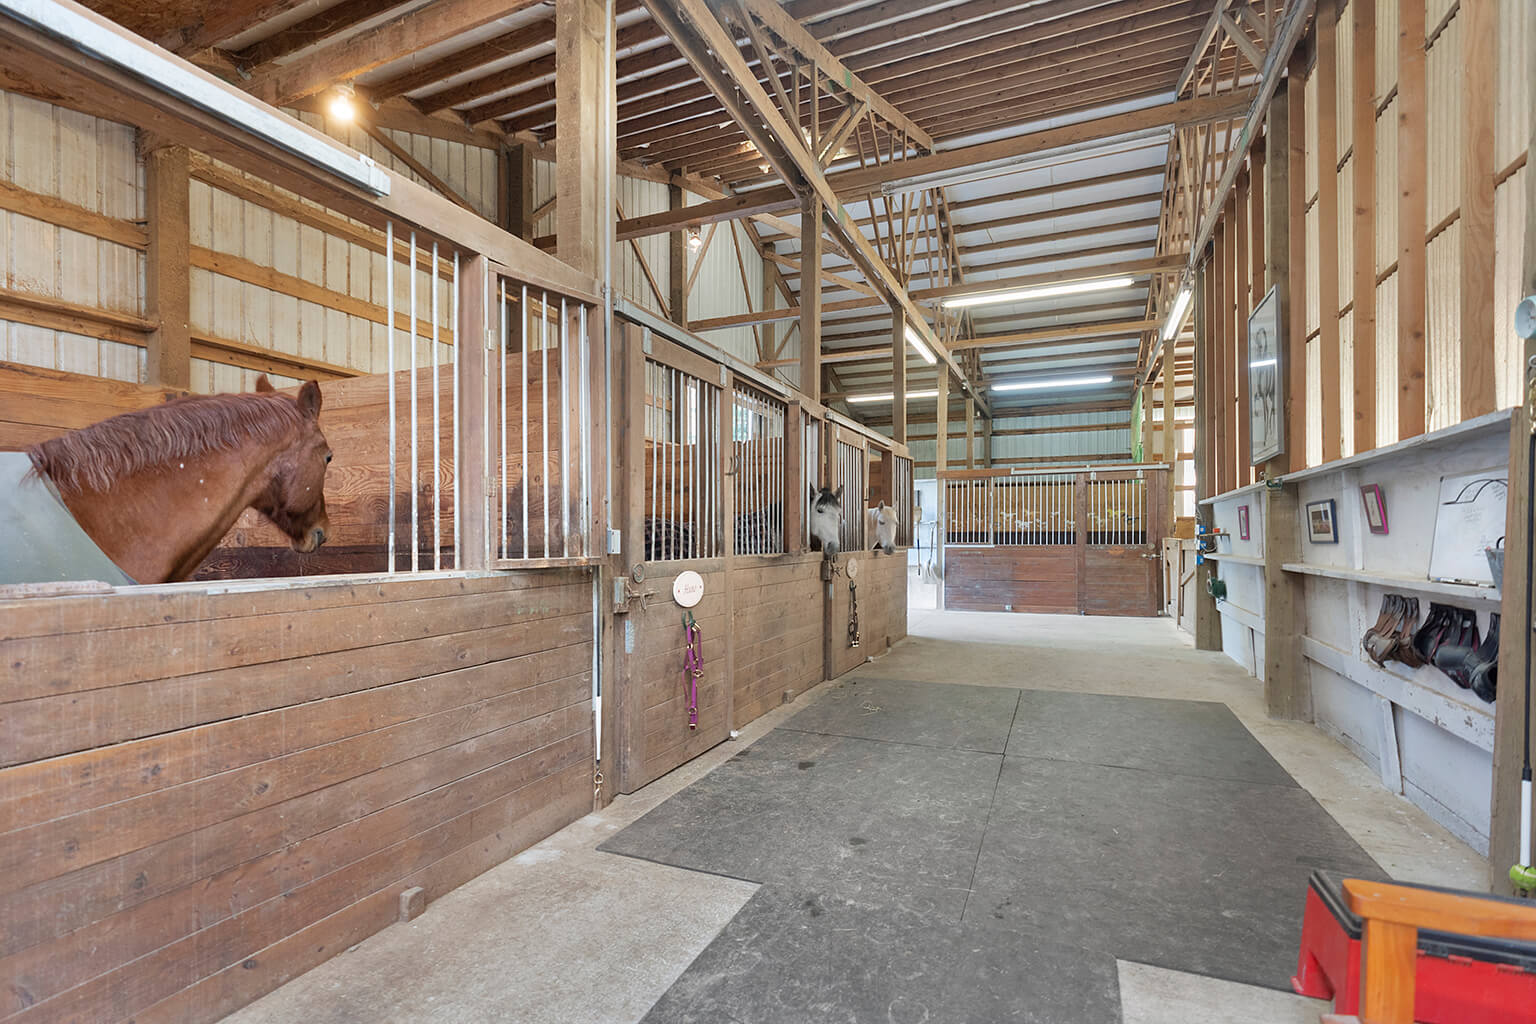 Five stall show barn with 12’ wide concrete aisle way